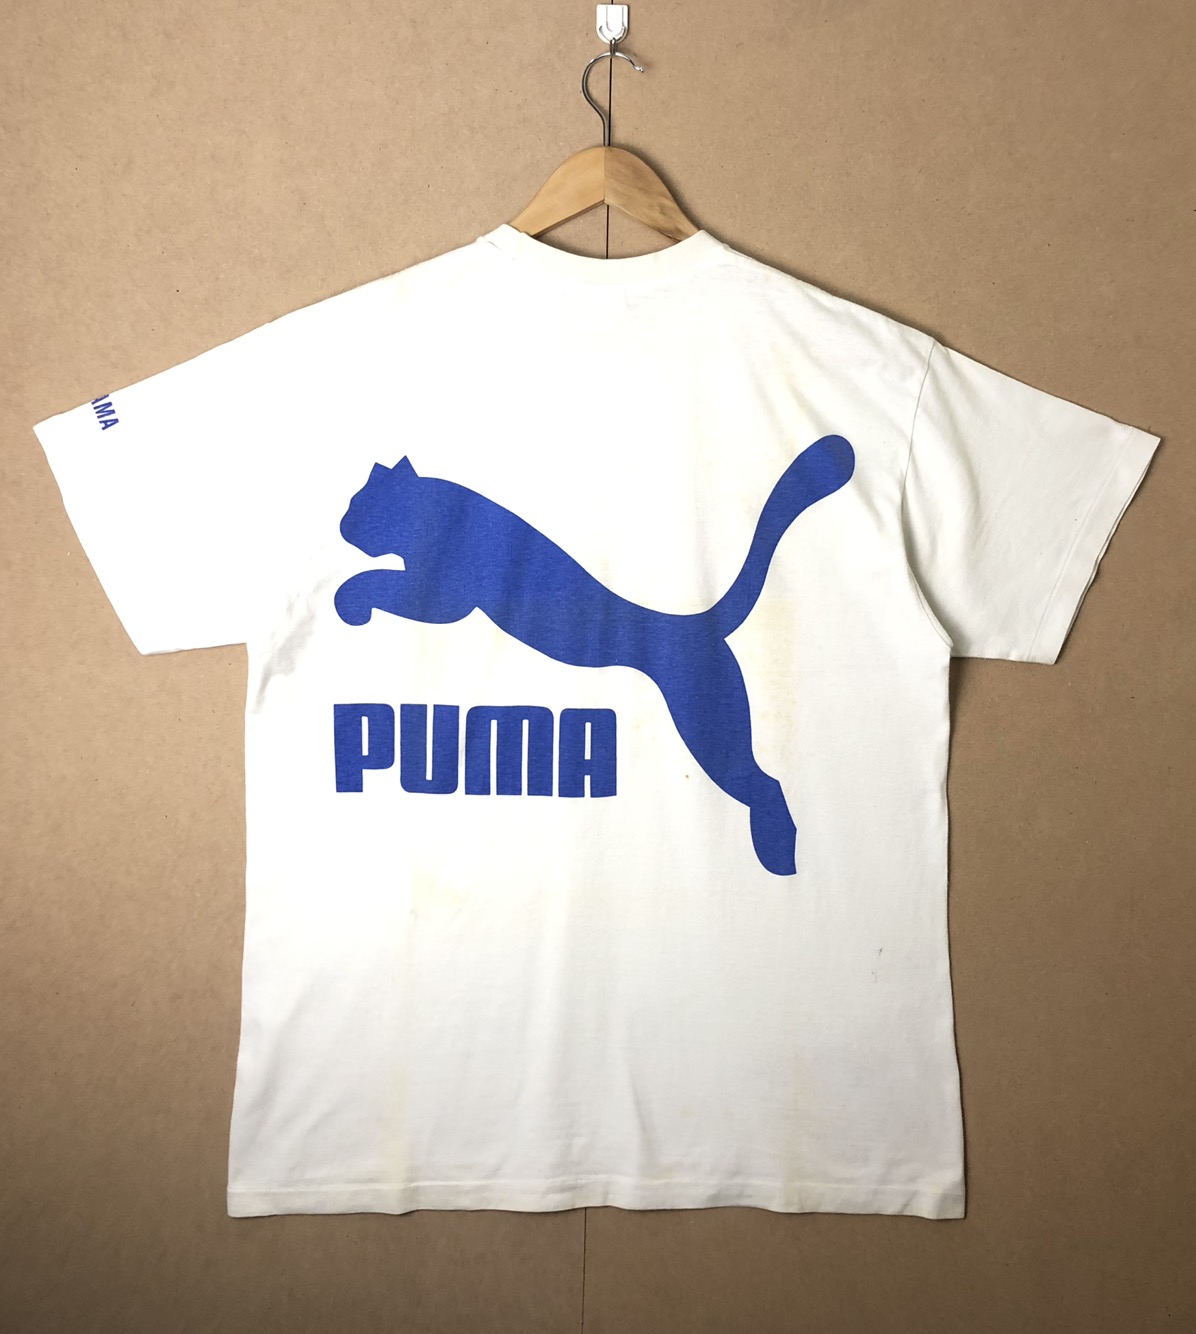 VTG 90s PUMA SHIRT AS FLUGELS WITH SPELL OUT BIG LOGO - 1